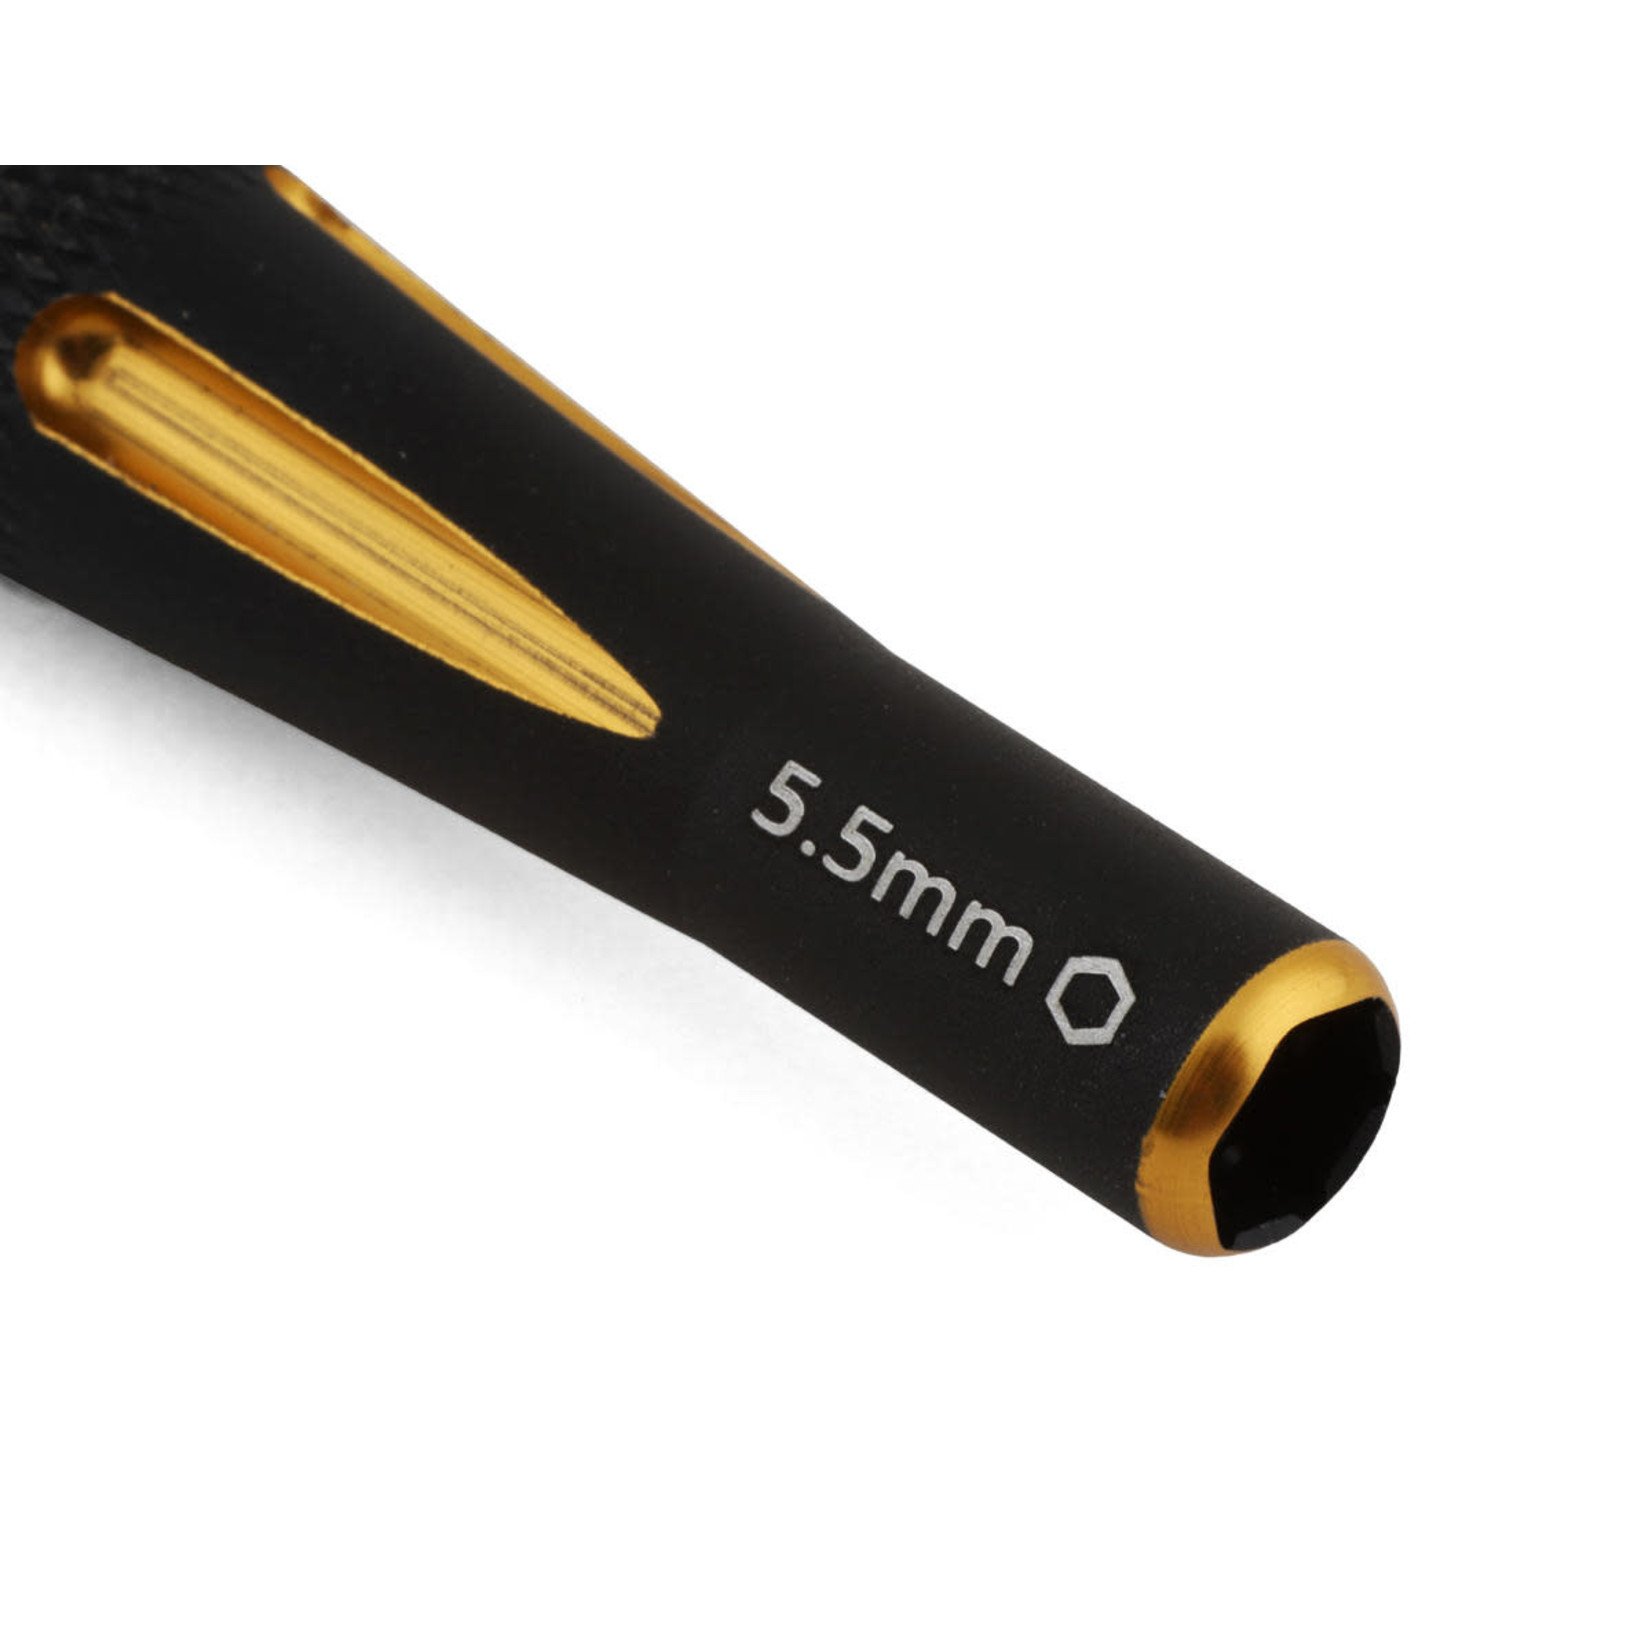 Samix Samix FCX24 2-in-1 Hex Wrench/Nut Driver (Gold) (1.5mm Hex/5.5mm Nut) #SAMFCX24-SD15